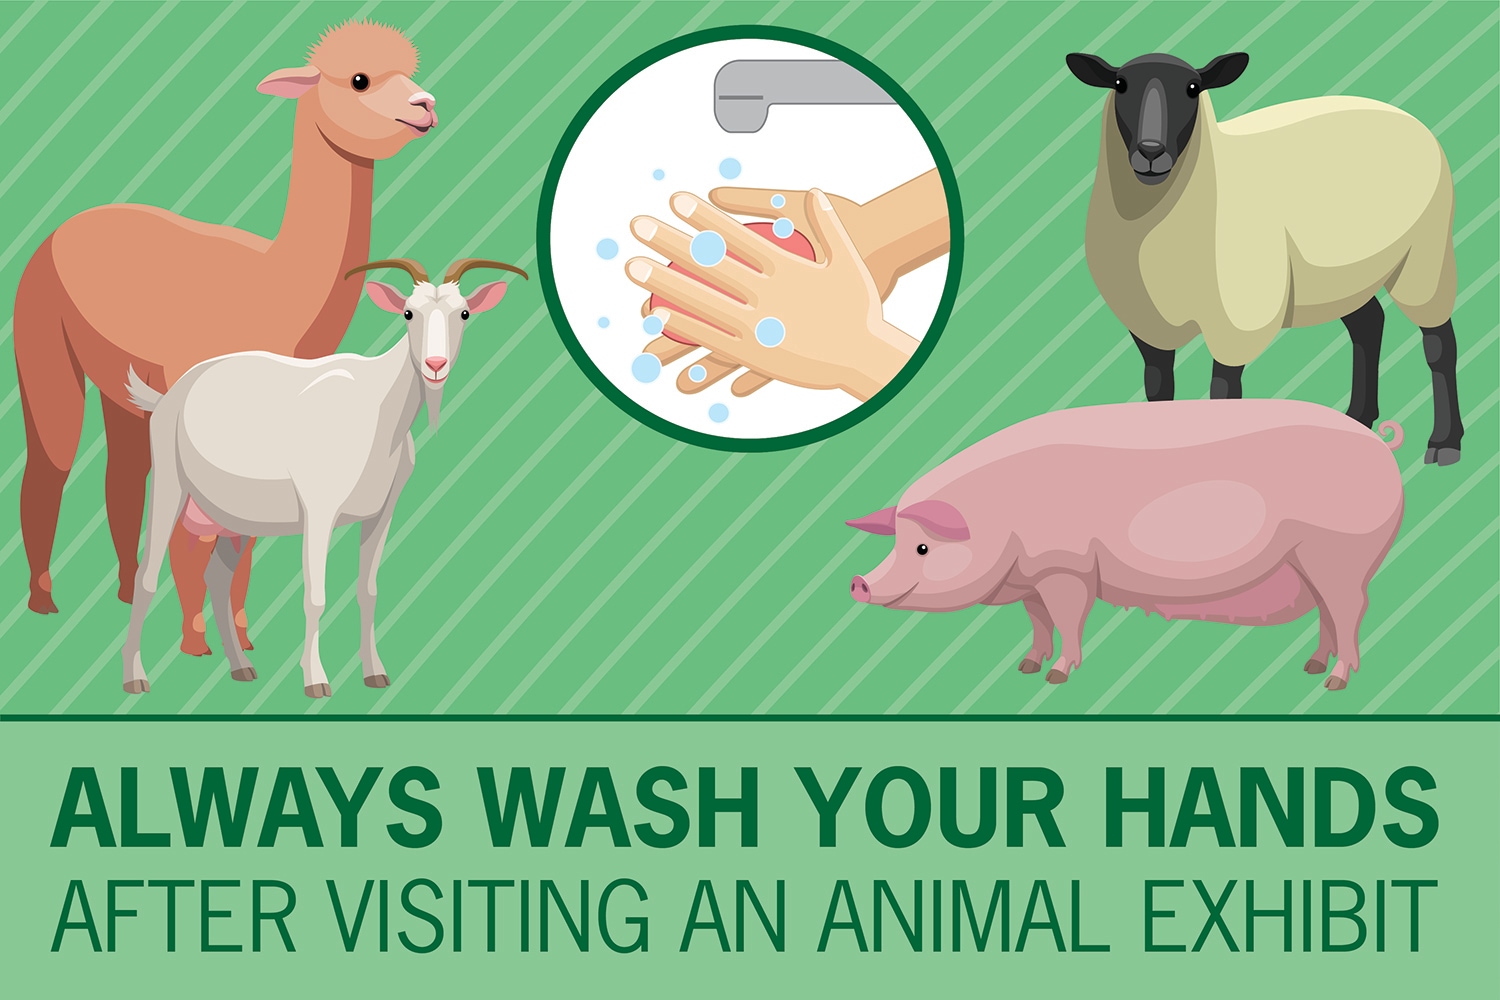 Wash Your Hands after Visiting a Petting Zoo cover